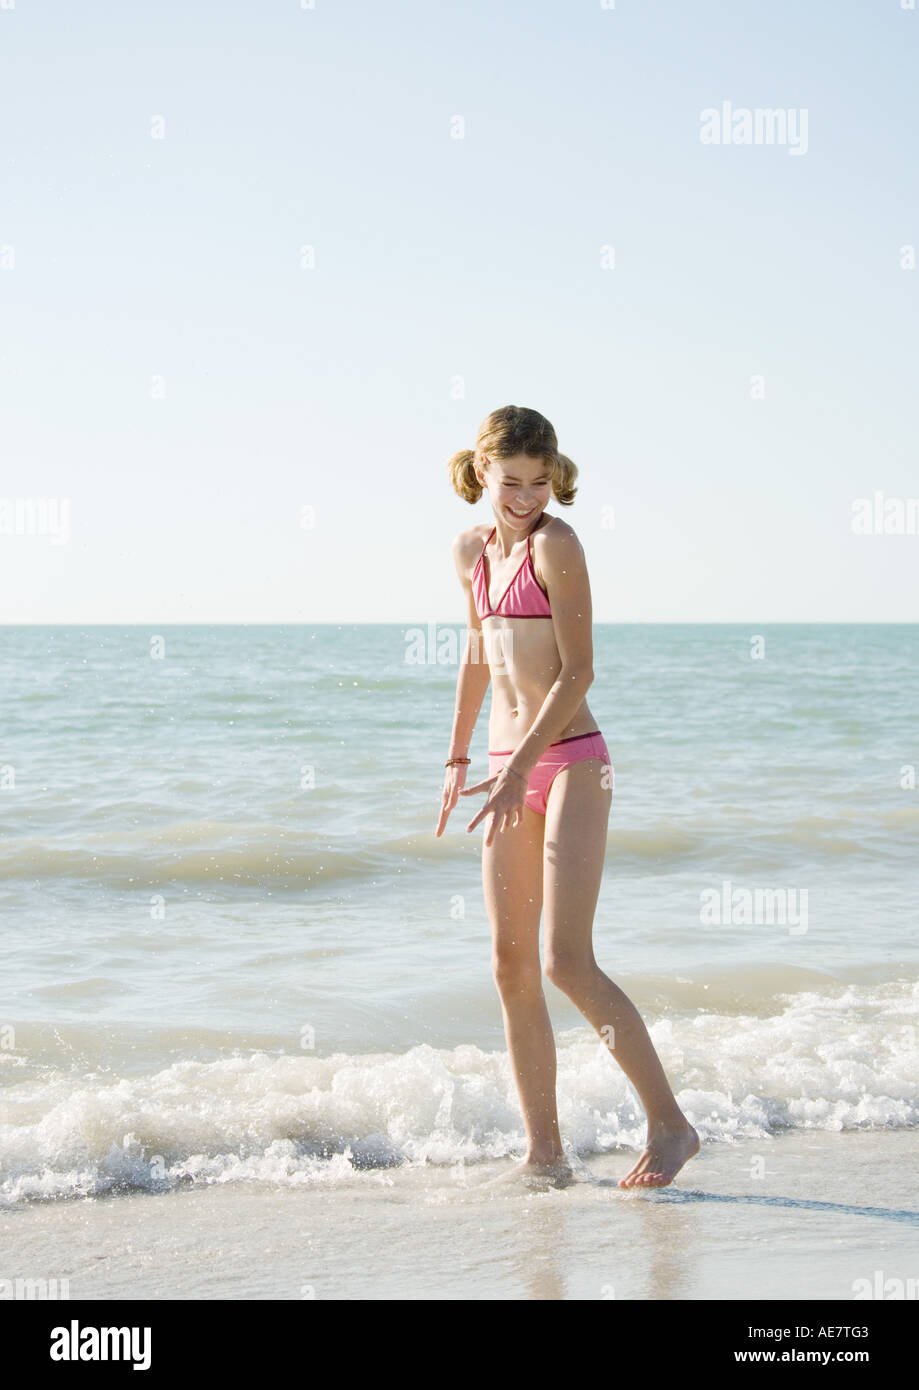 Skinny Girl In Bikini High Resolution Stock Photography and Images - Alamy